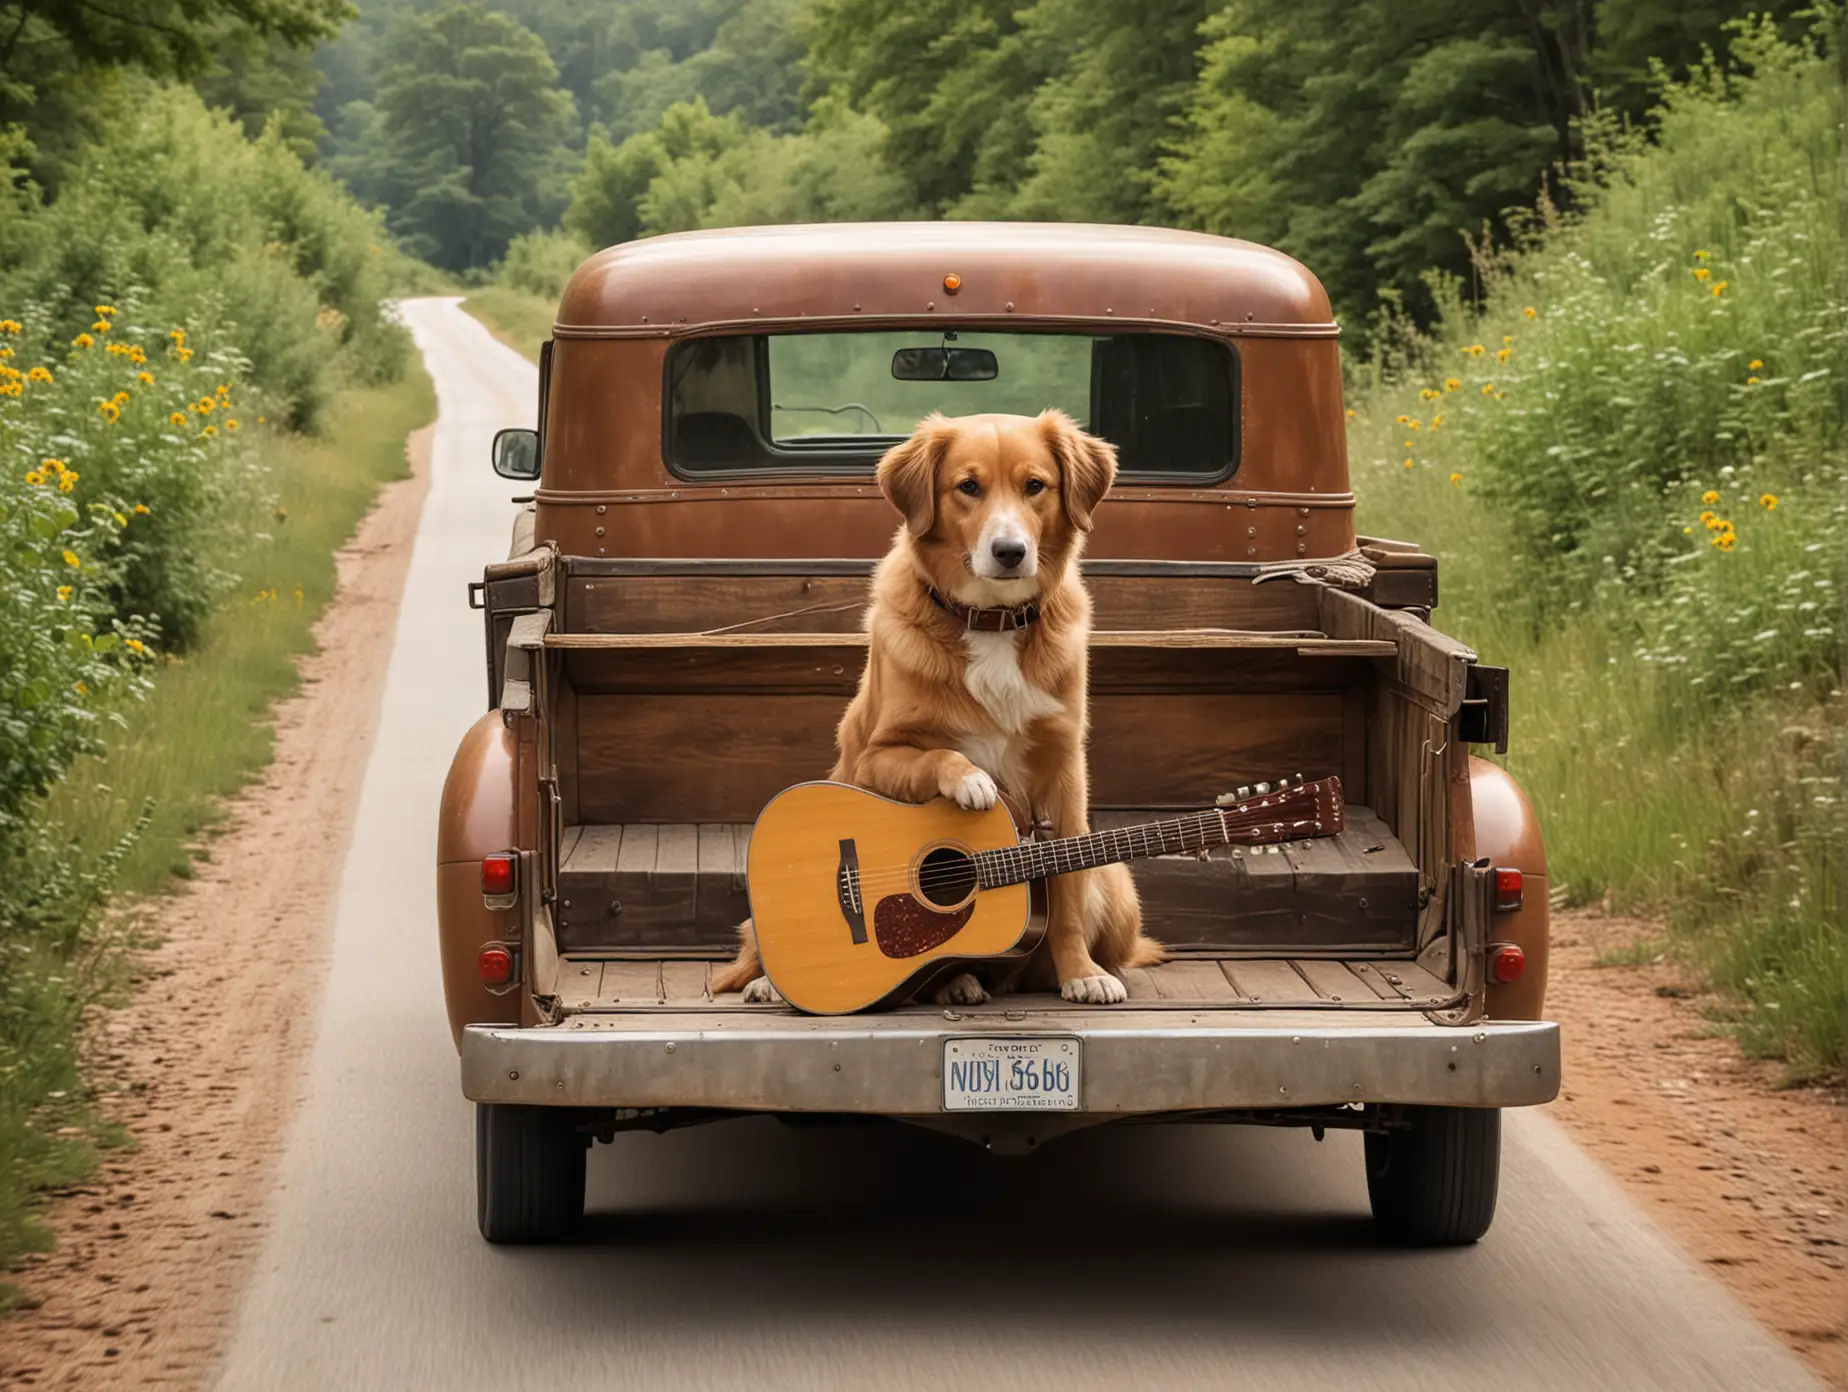 vintage pickup driving away down the winding road with an acoustic guitar and a dog in the truck bed

